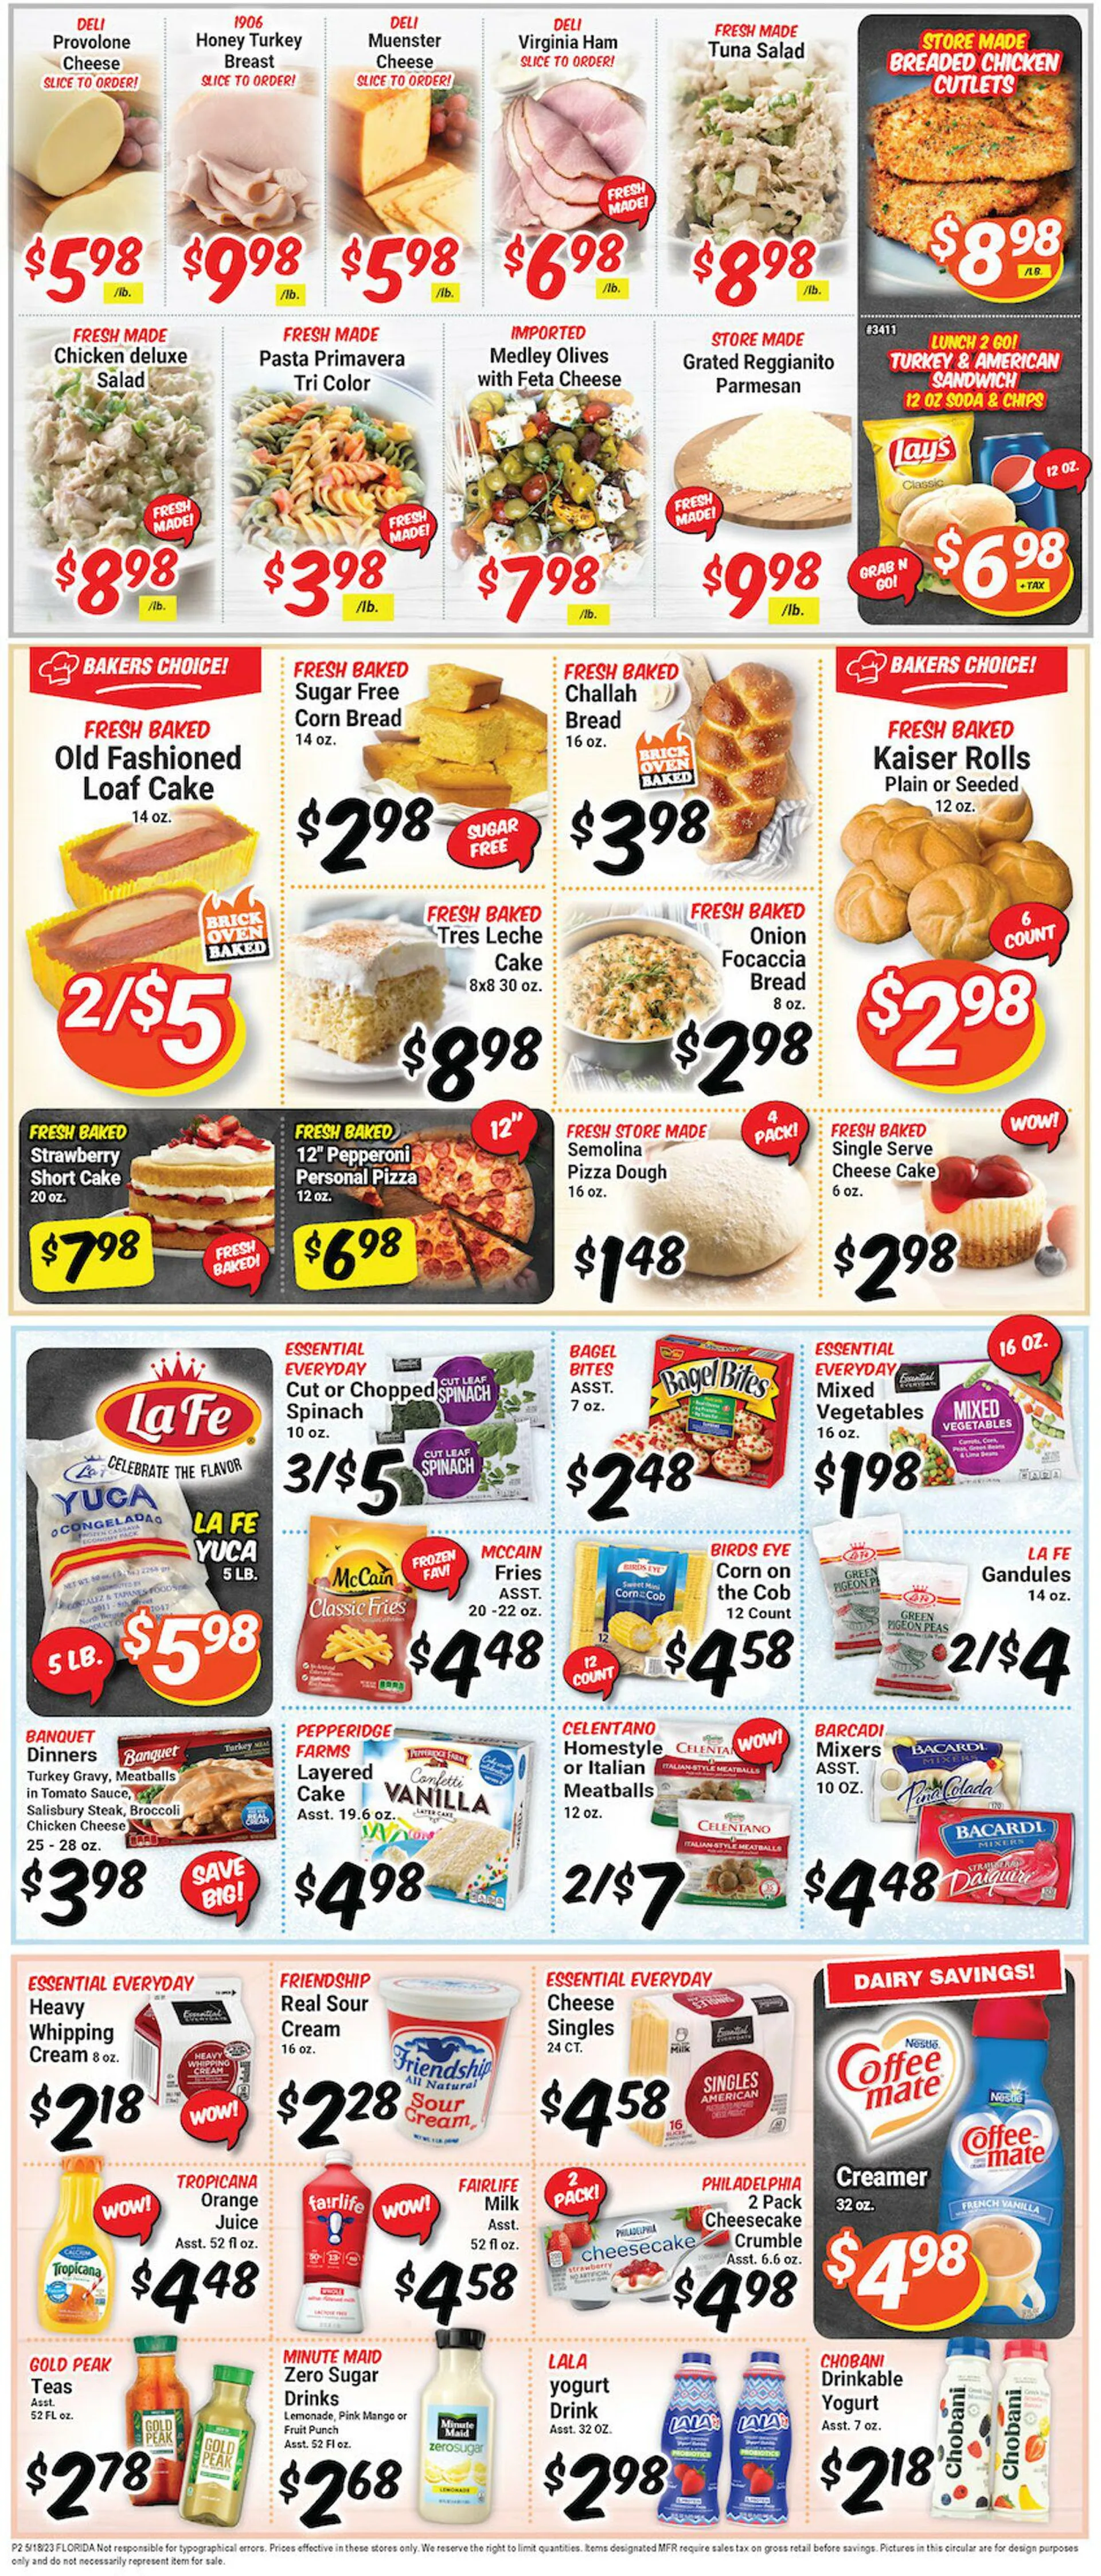 Western Beef Current weekly ad - 3